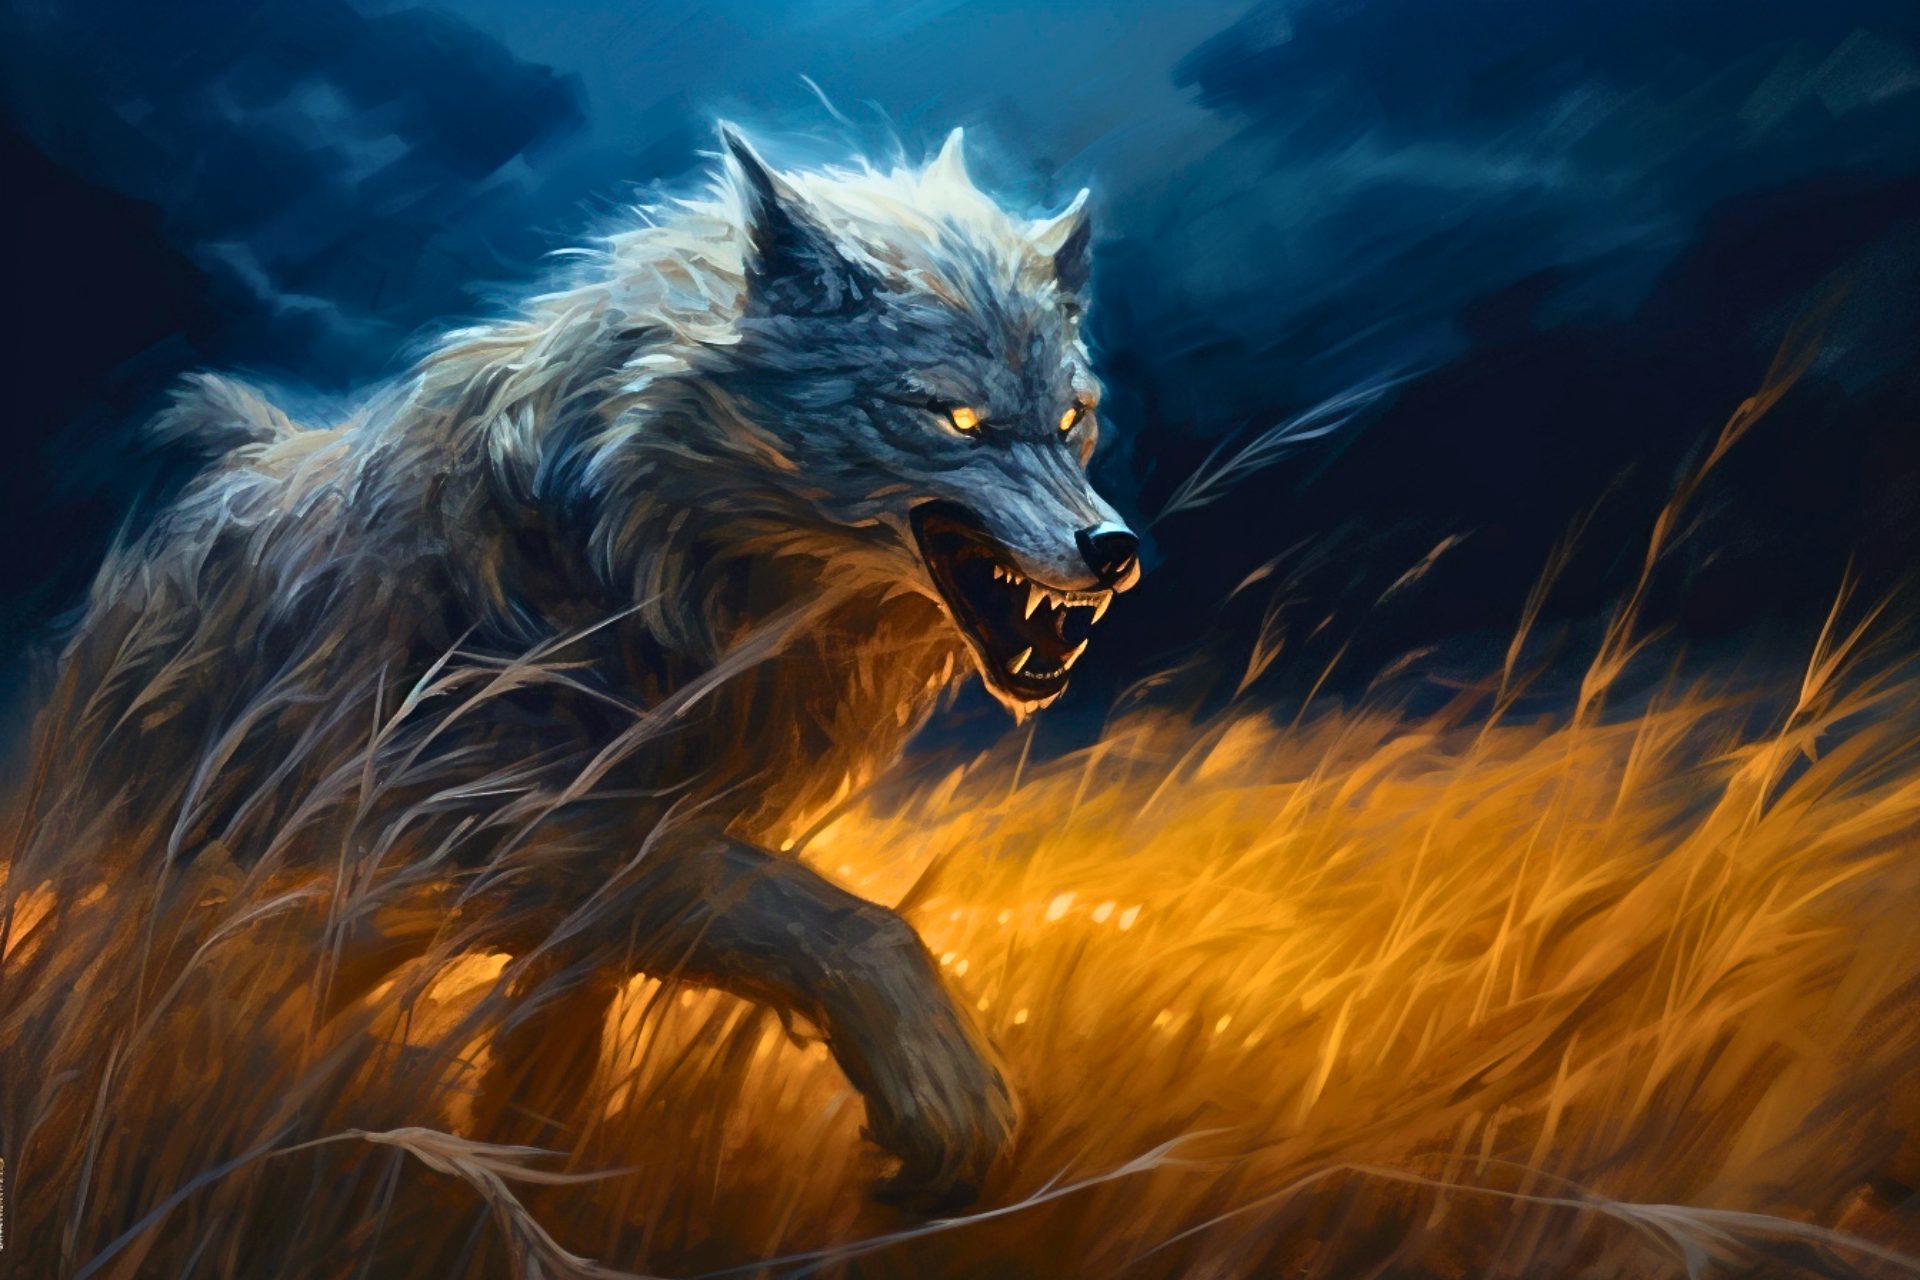 An illustration of a vicious-looking wolf spirit, roaming a field in search of children.